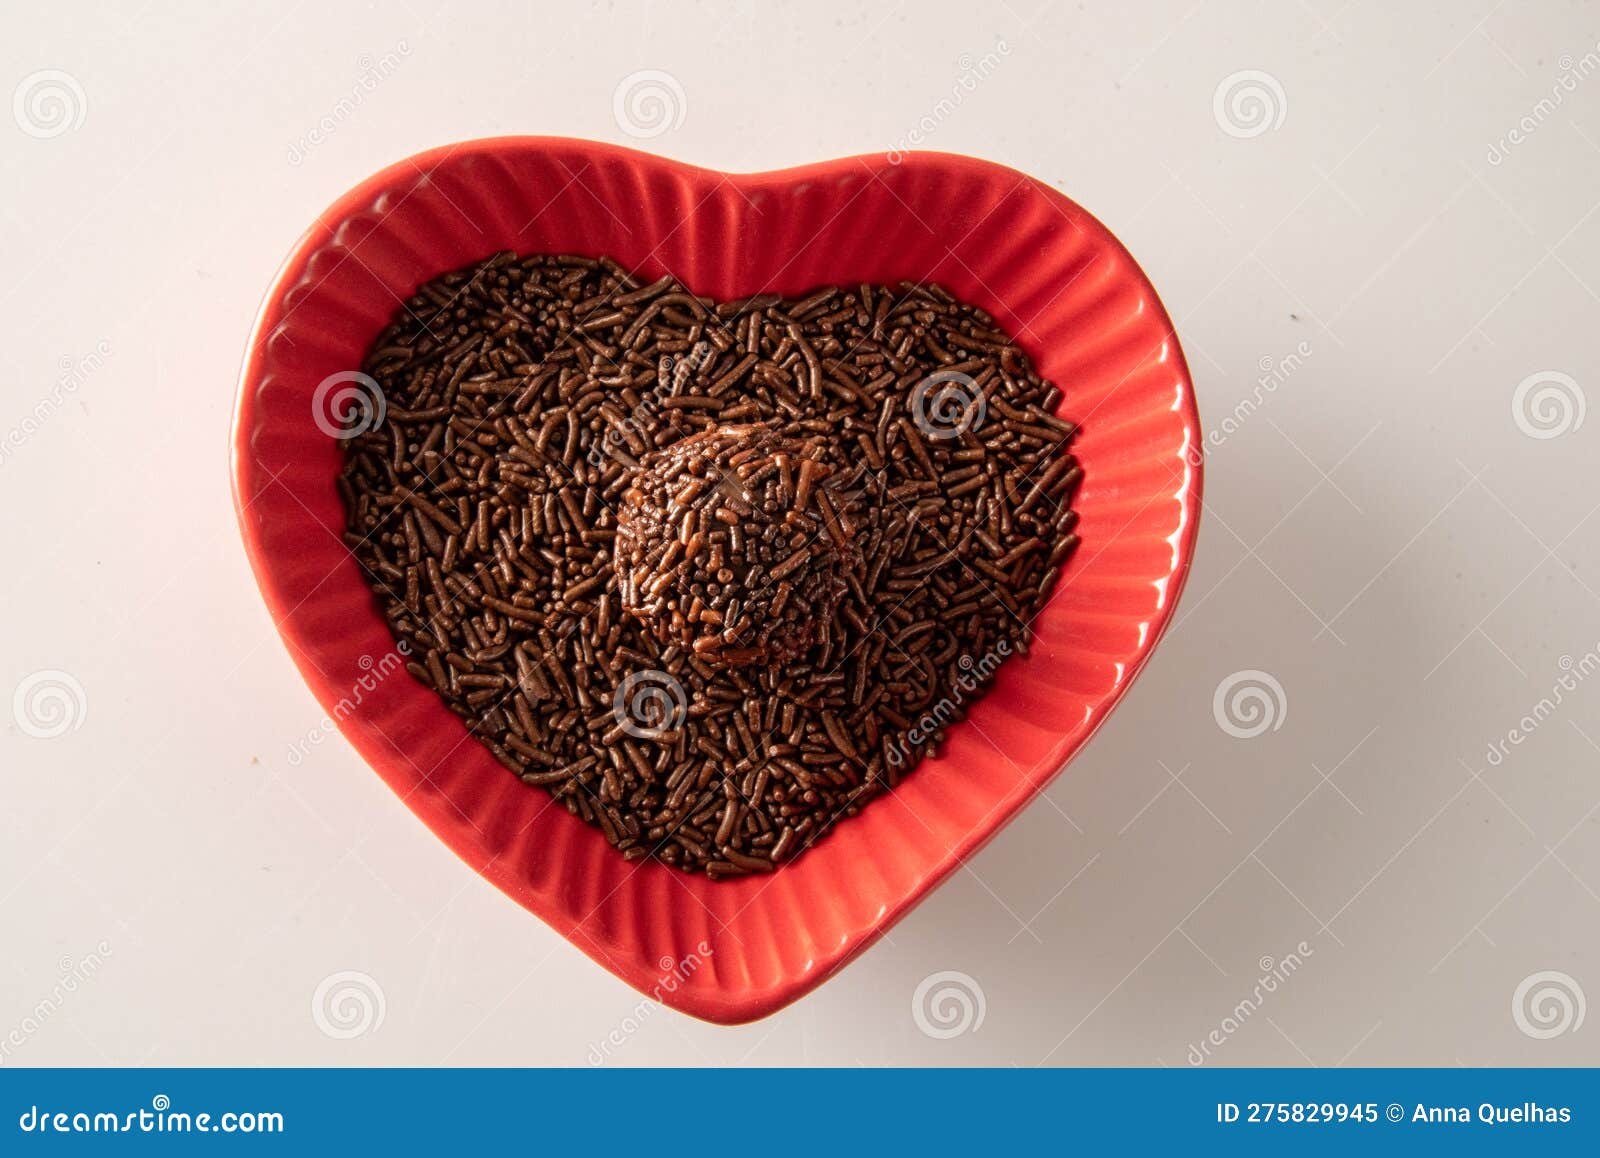 brigadeiro over a red heart d bowl i  on white background